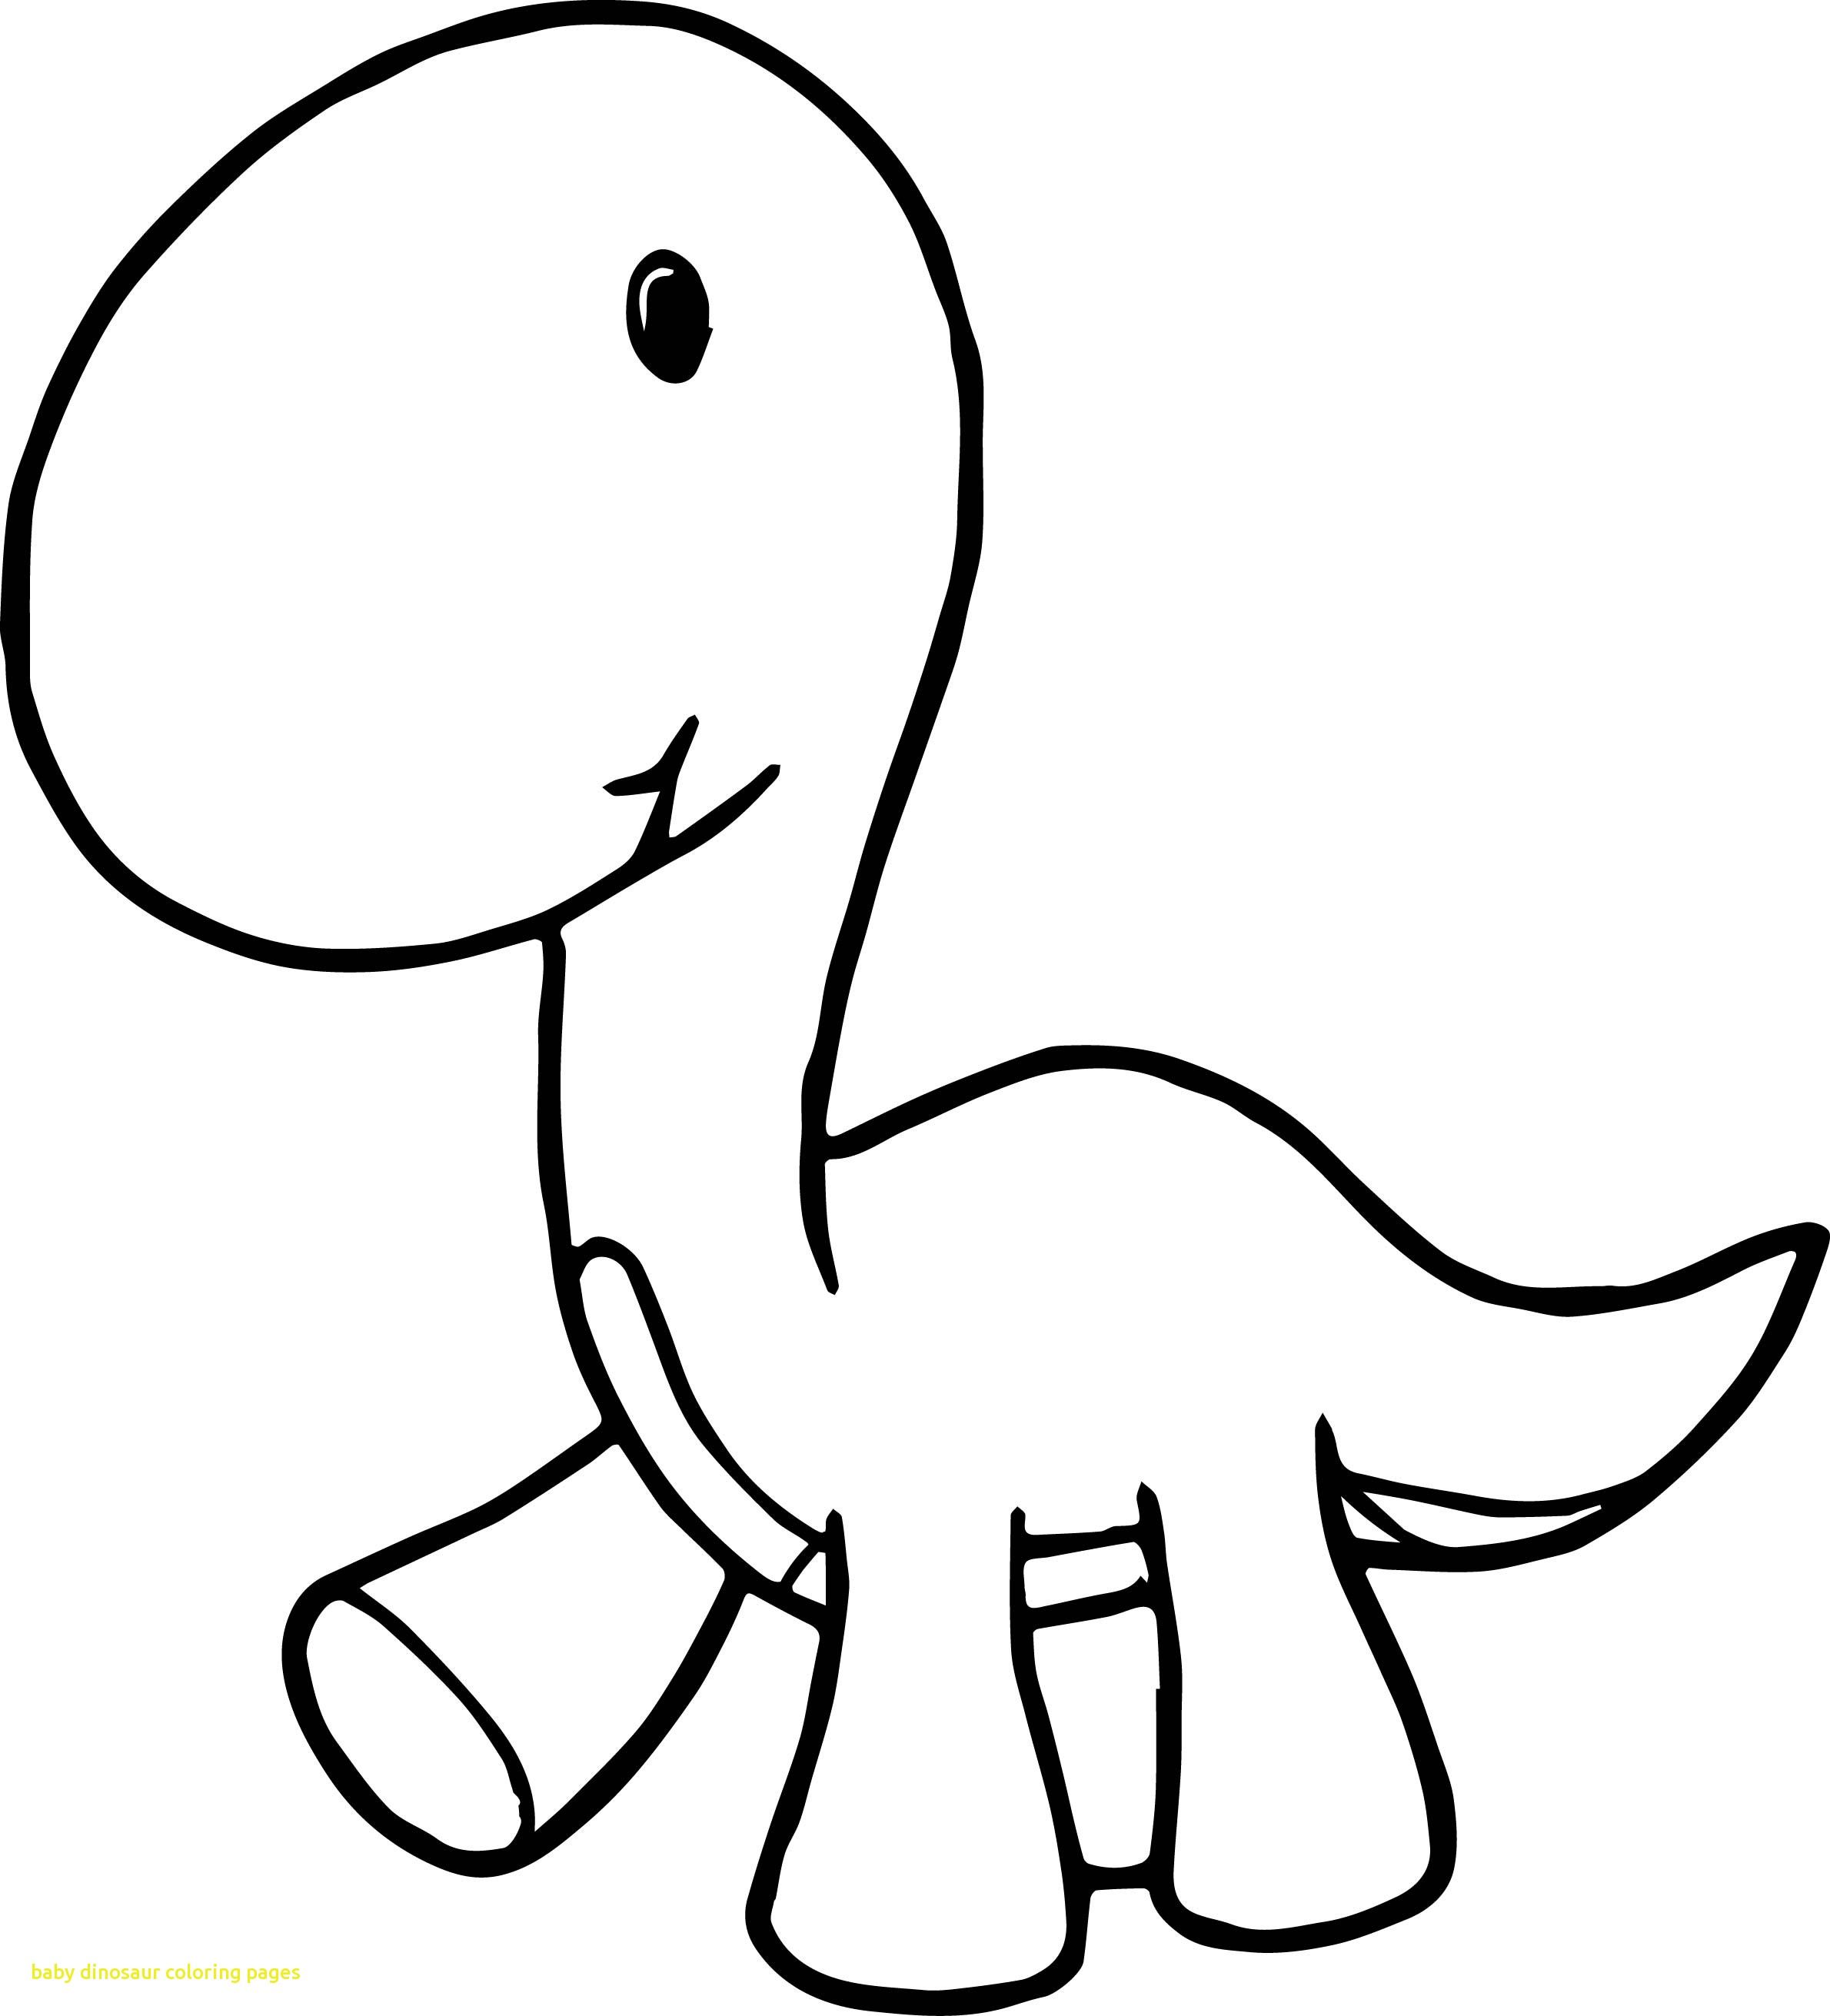 Simple Dinosaur Drawing | Free download on ClipArtMag